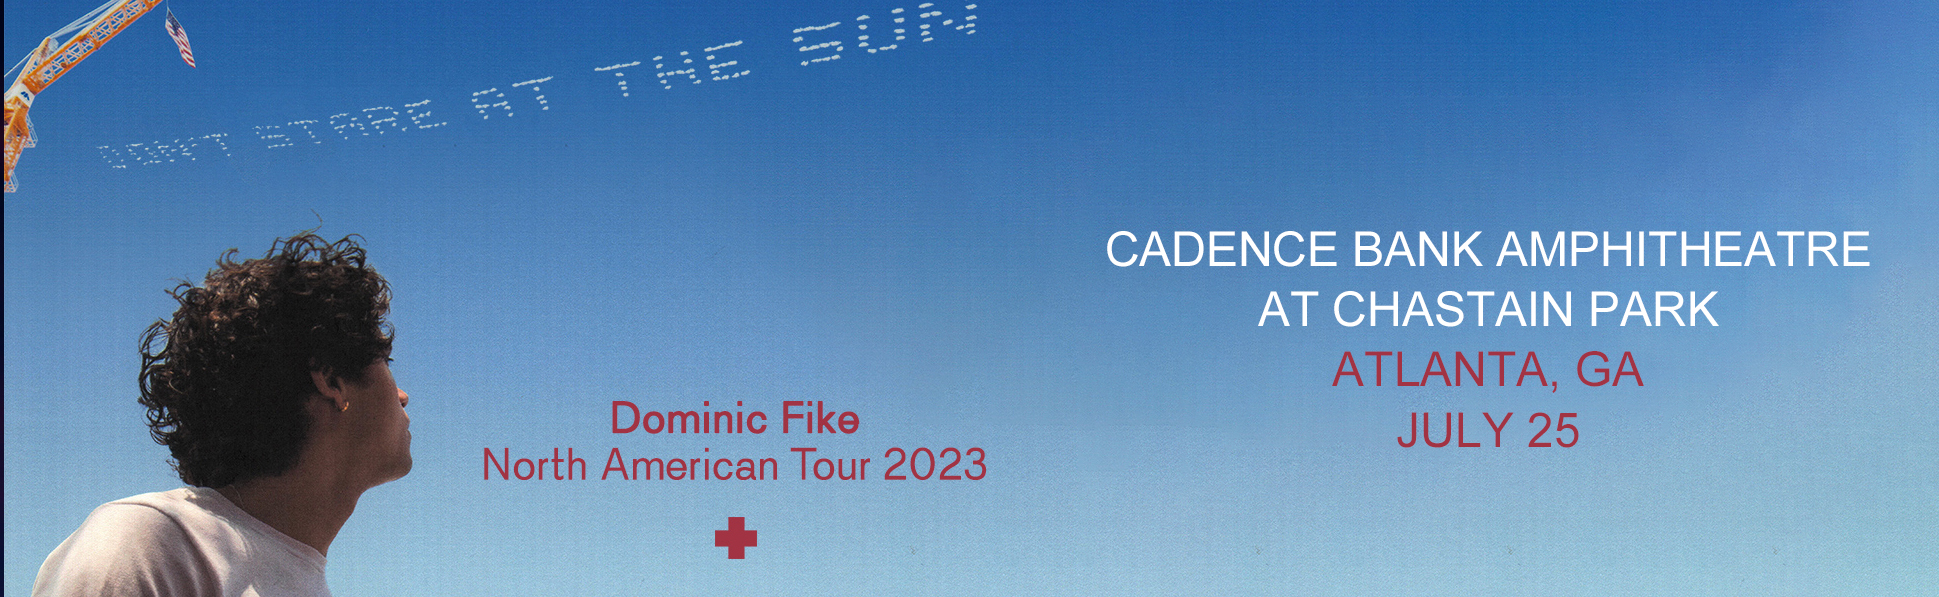 Dominic Fike at Cadence Bank Amphitheatre